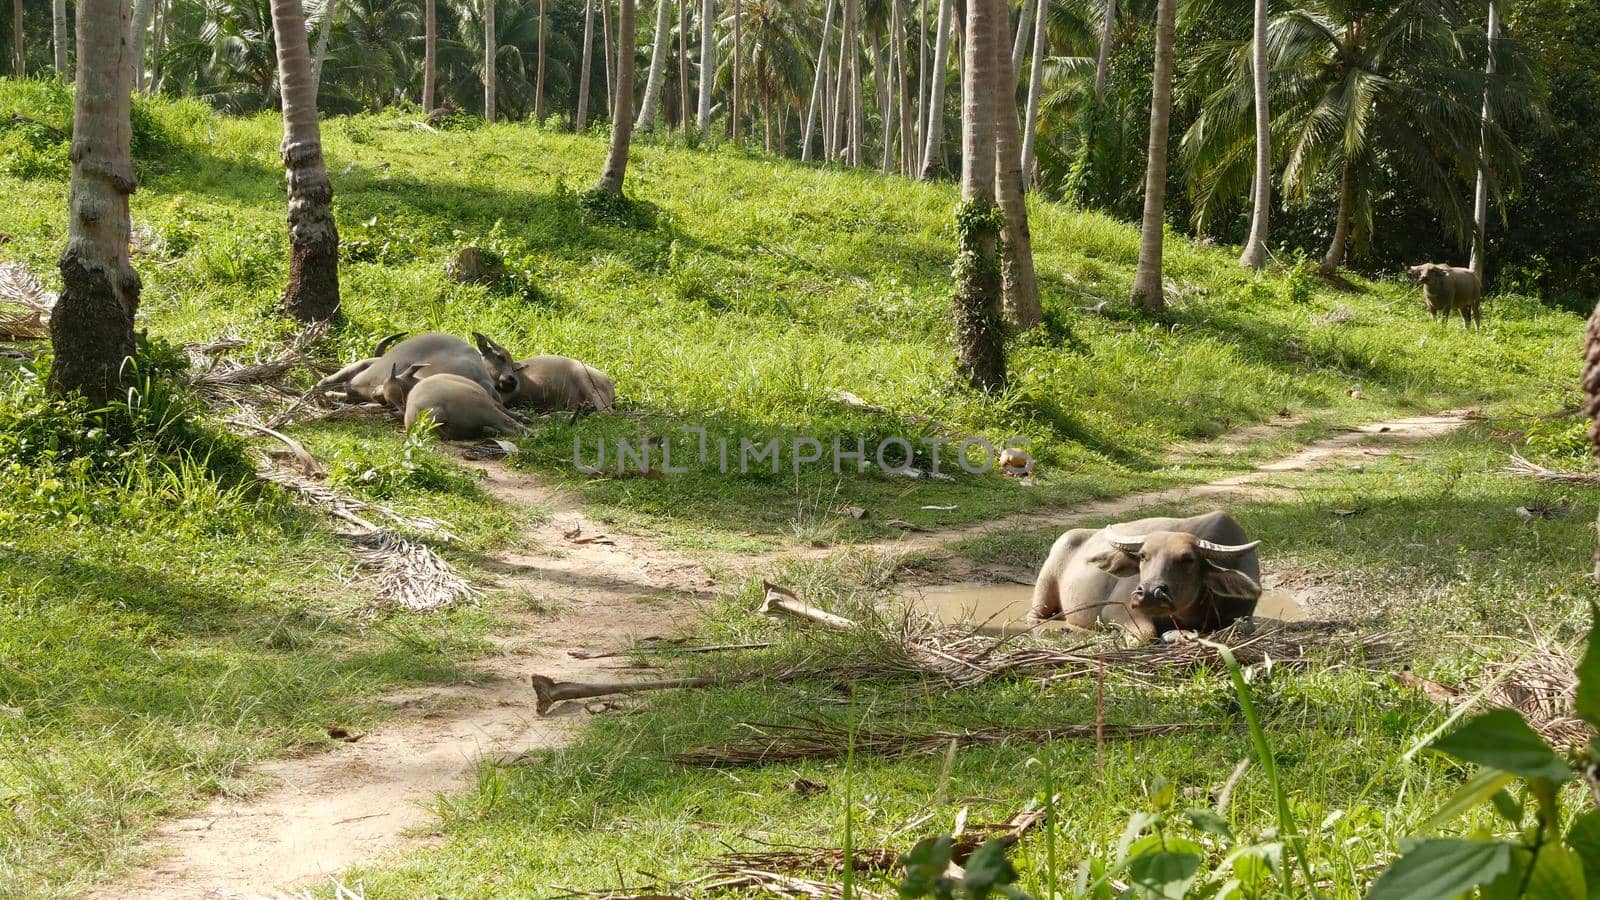 Buffalo family among green vegetation. Large well maintained bulls grazing in greenery, typical landscape of coconut palm plantation in Thailand. Agriculture concept, traditional livestock in Asia by DogoraSun